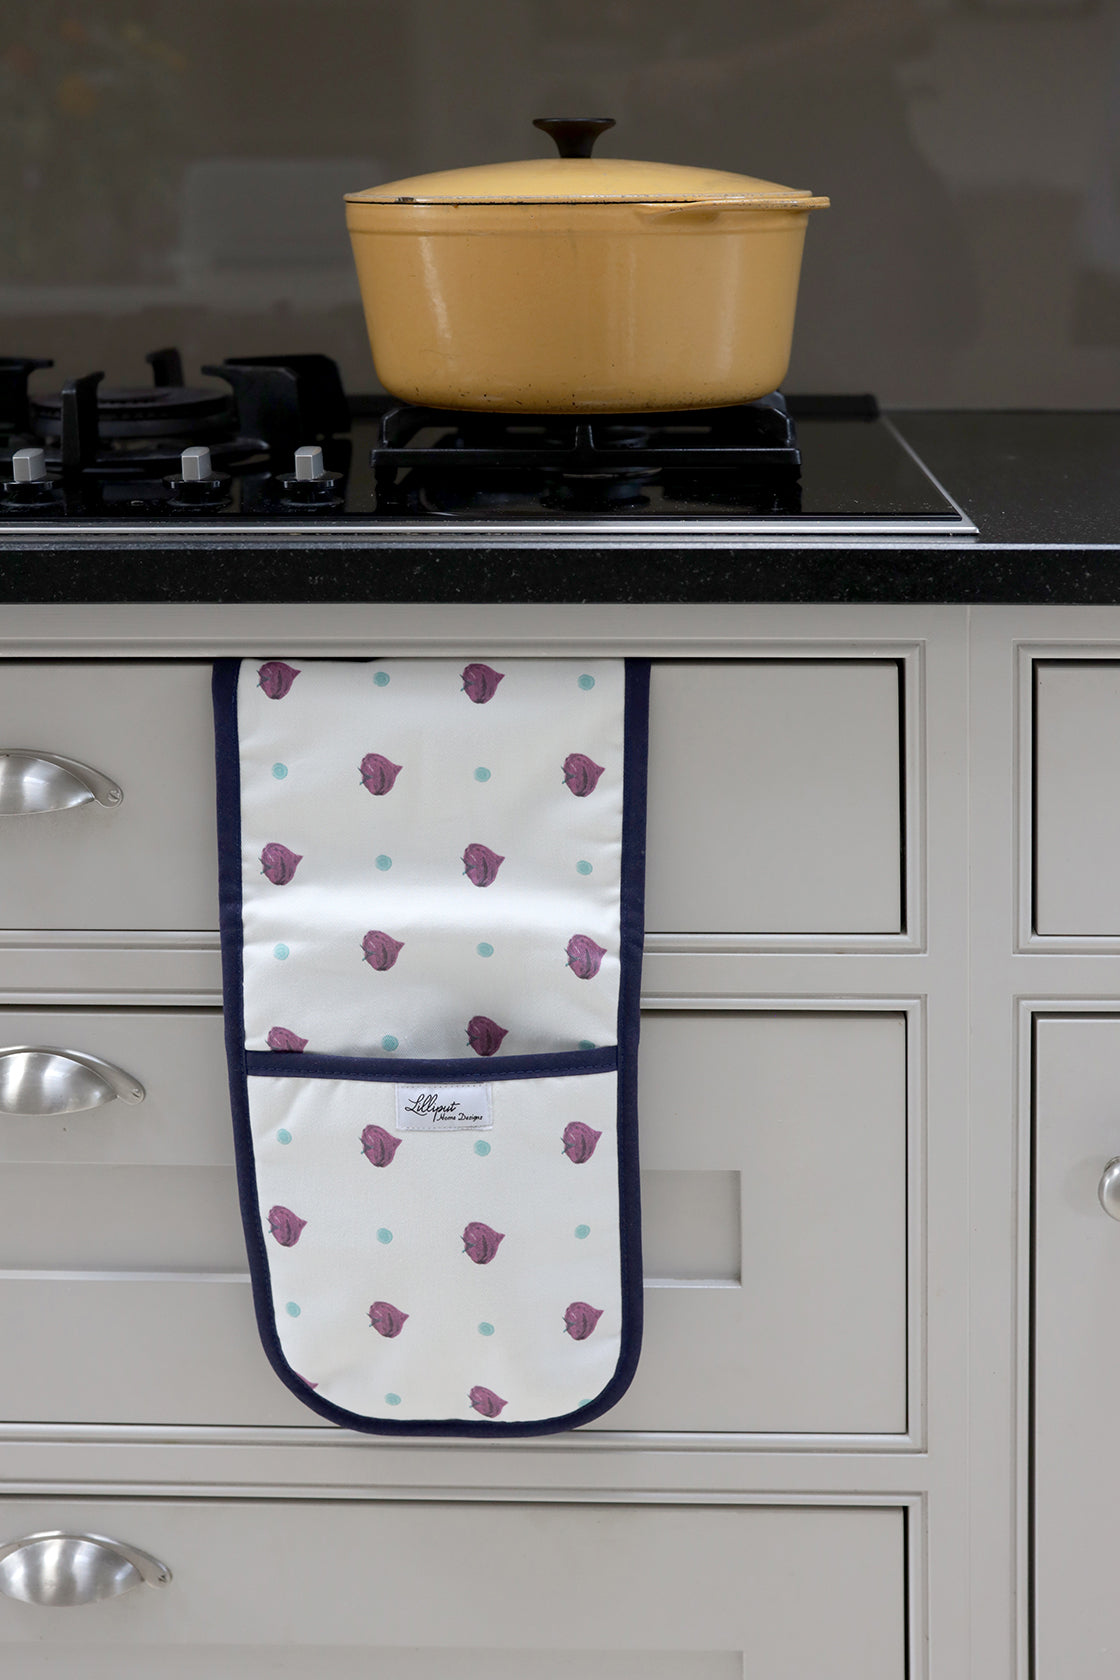 Beetroot oven gloves from the kitchen linens collections